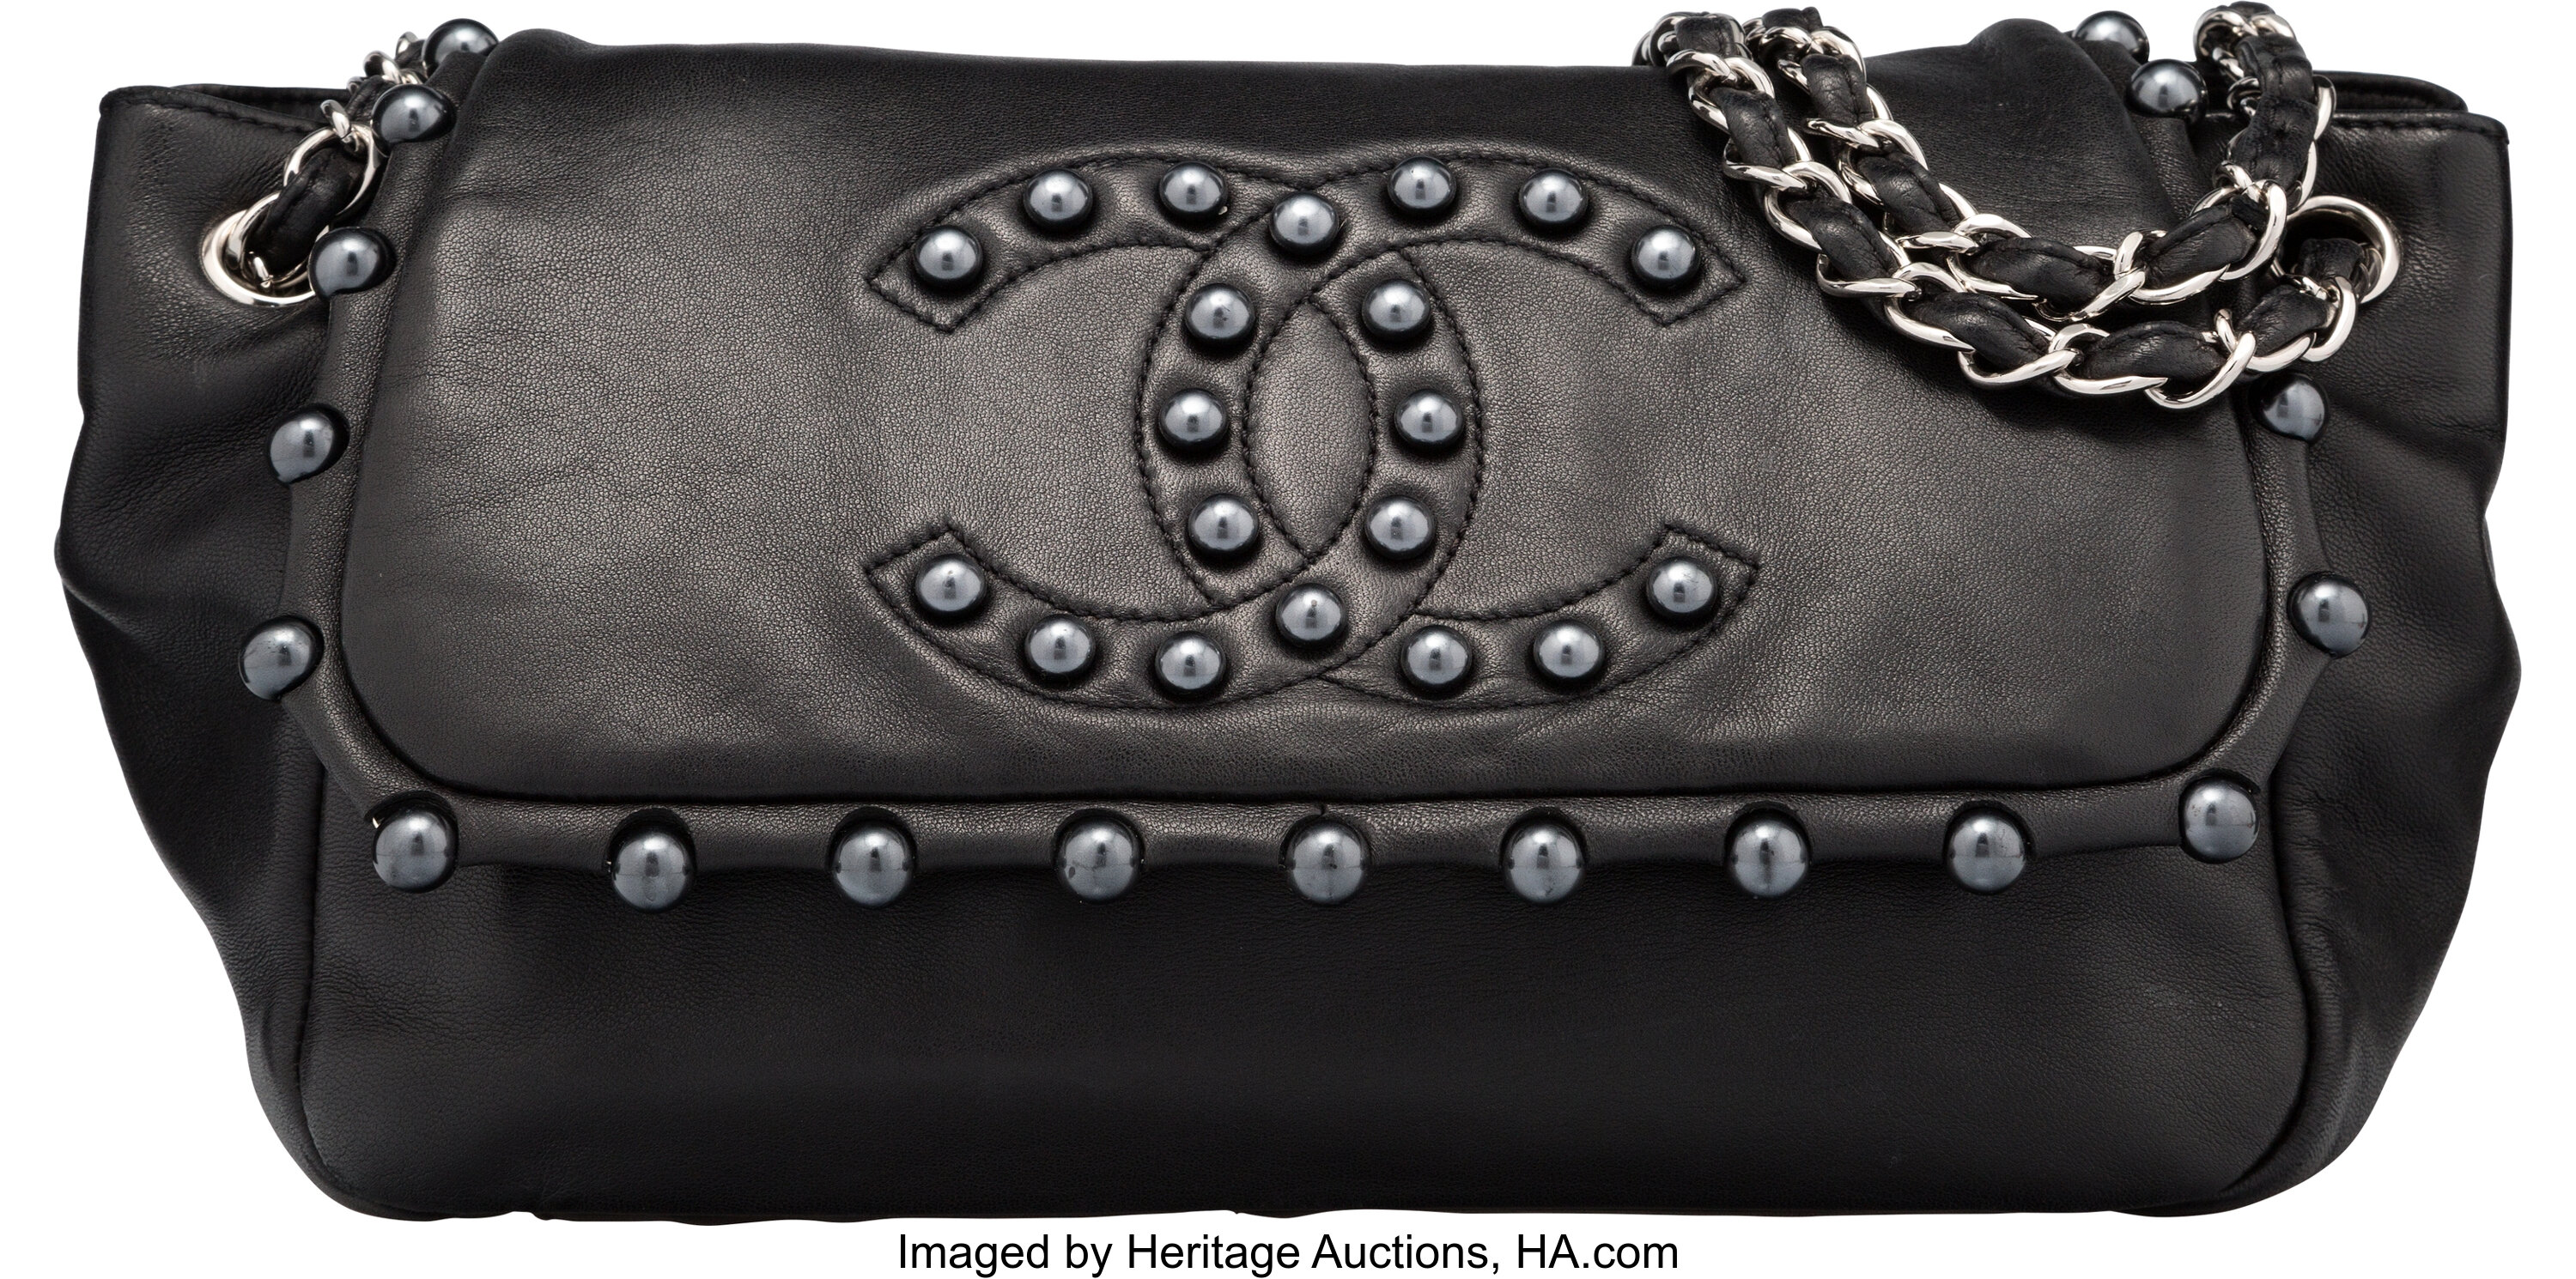 Heritage Auctions Search, Luxury Accessories [2268]